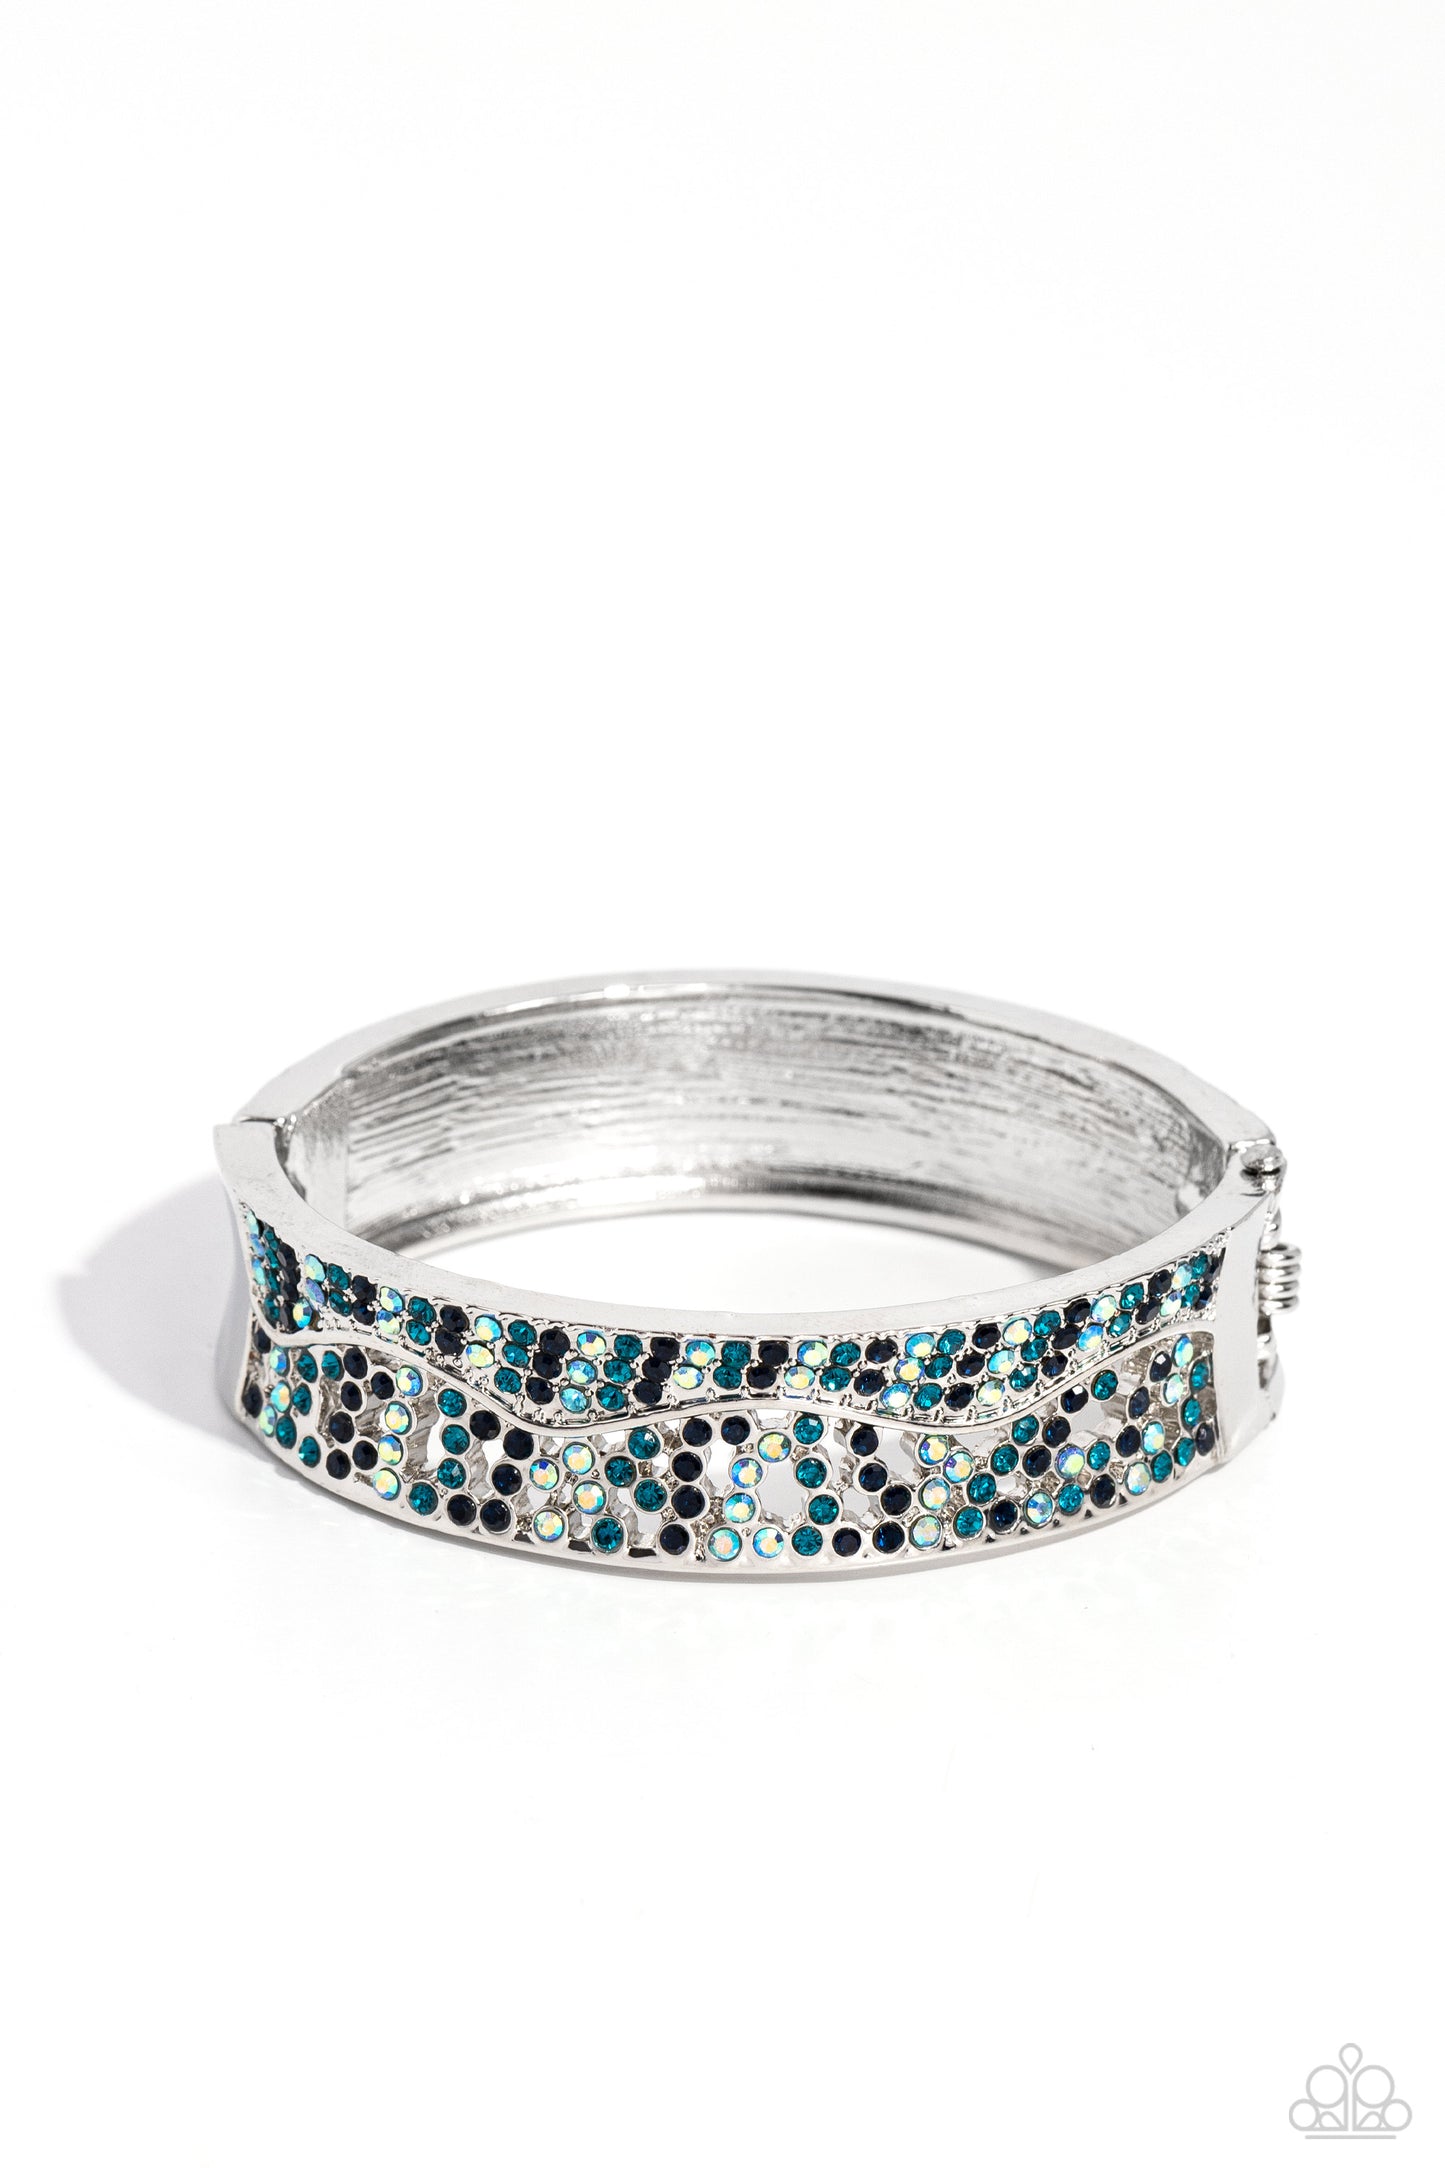 Wavy Whimsy Blue Hinge Bracelet - Paparazzi Accessories  Dusted in sections of dainty Montana, blue iridescent, and blue rhinestones, asymmetrically wavy thick silver bars boldly cross around the wrist in an airy pattern creating a gritty yet glamorous cuff.  Sold as one individual bracelet.  Sku:  P9RE-BLXX-243XX